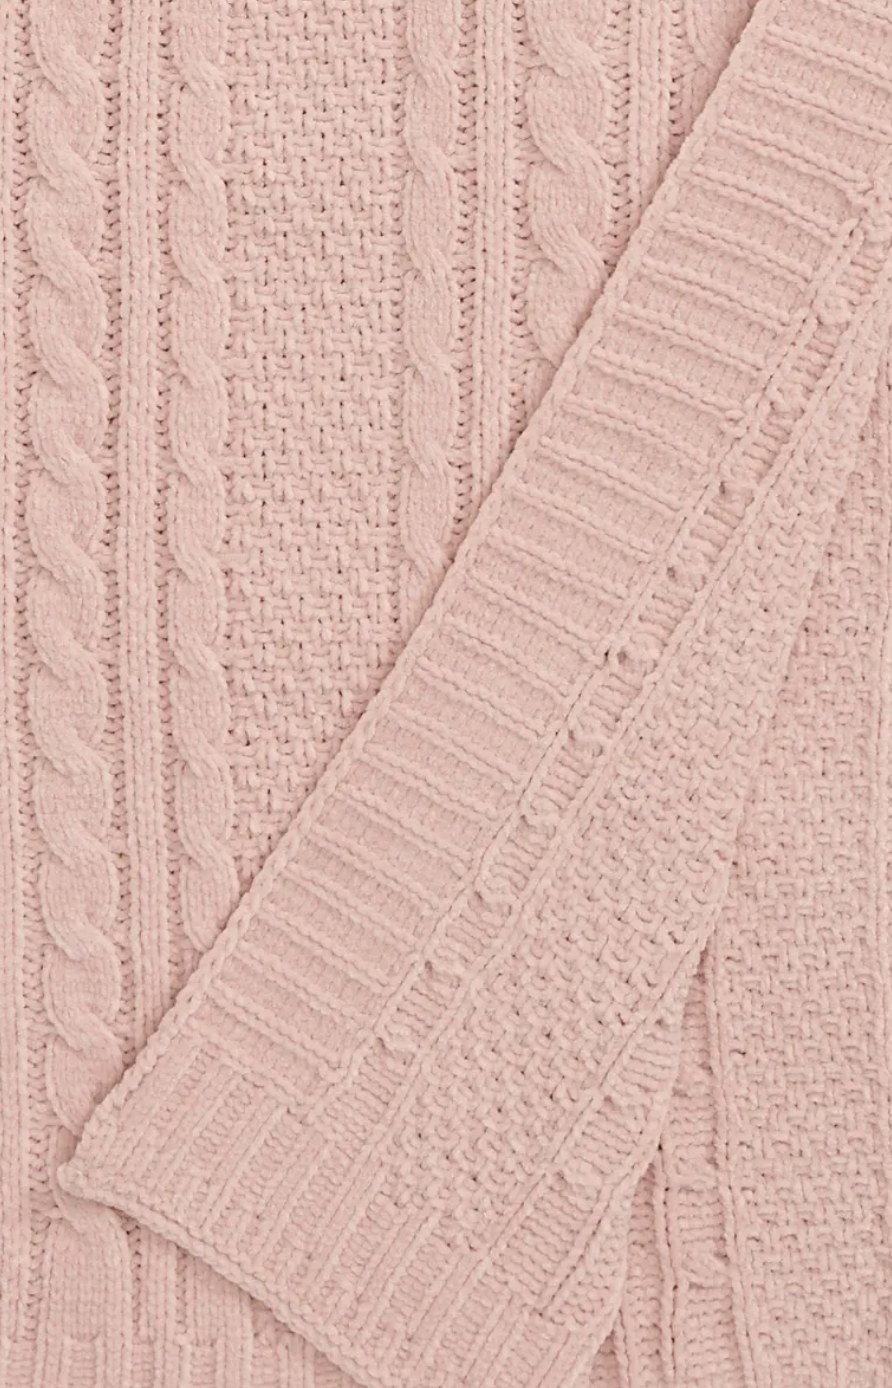 Close-up of the soft knit pink blanket